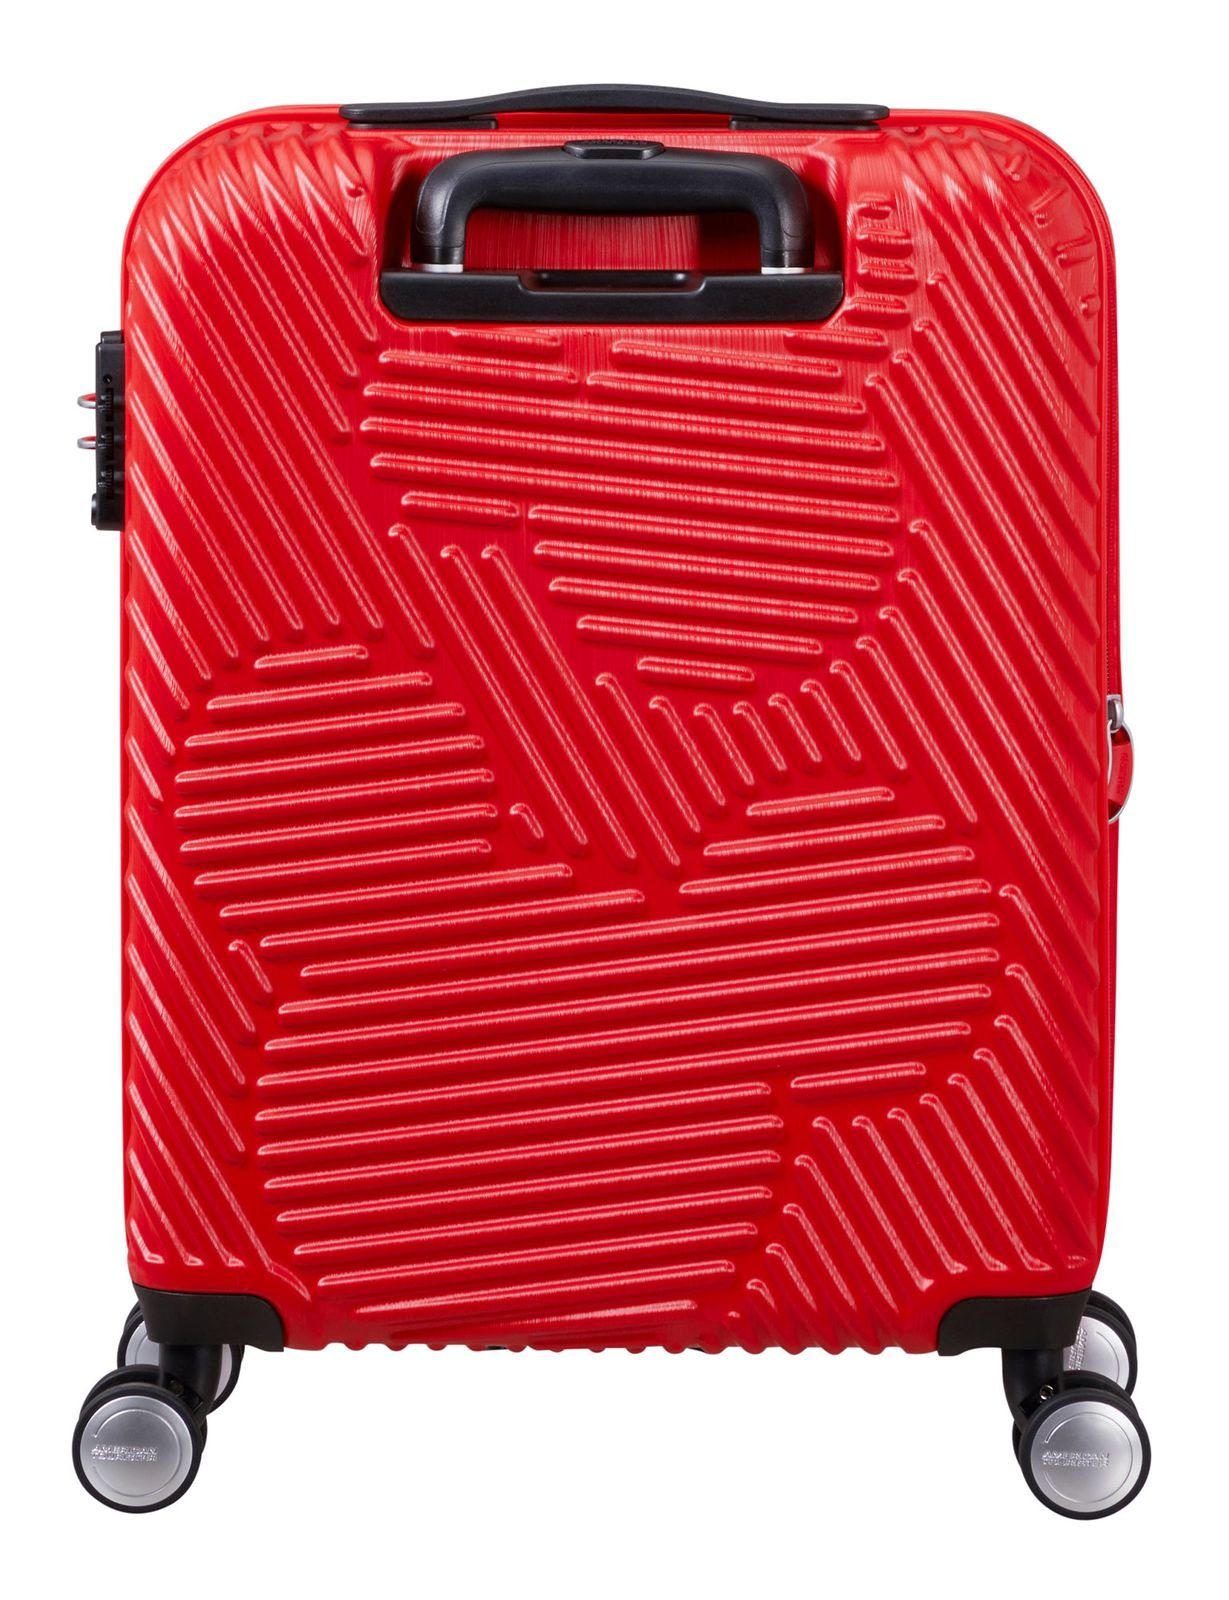 American Tourister® Hartschalen-Trolley Mickey Mickey Clouds, Rollen Classic 4 Red